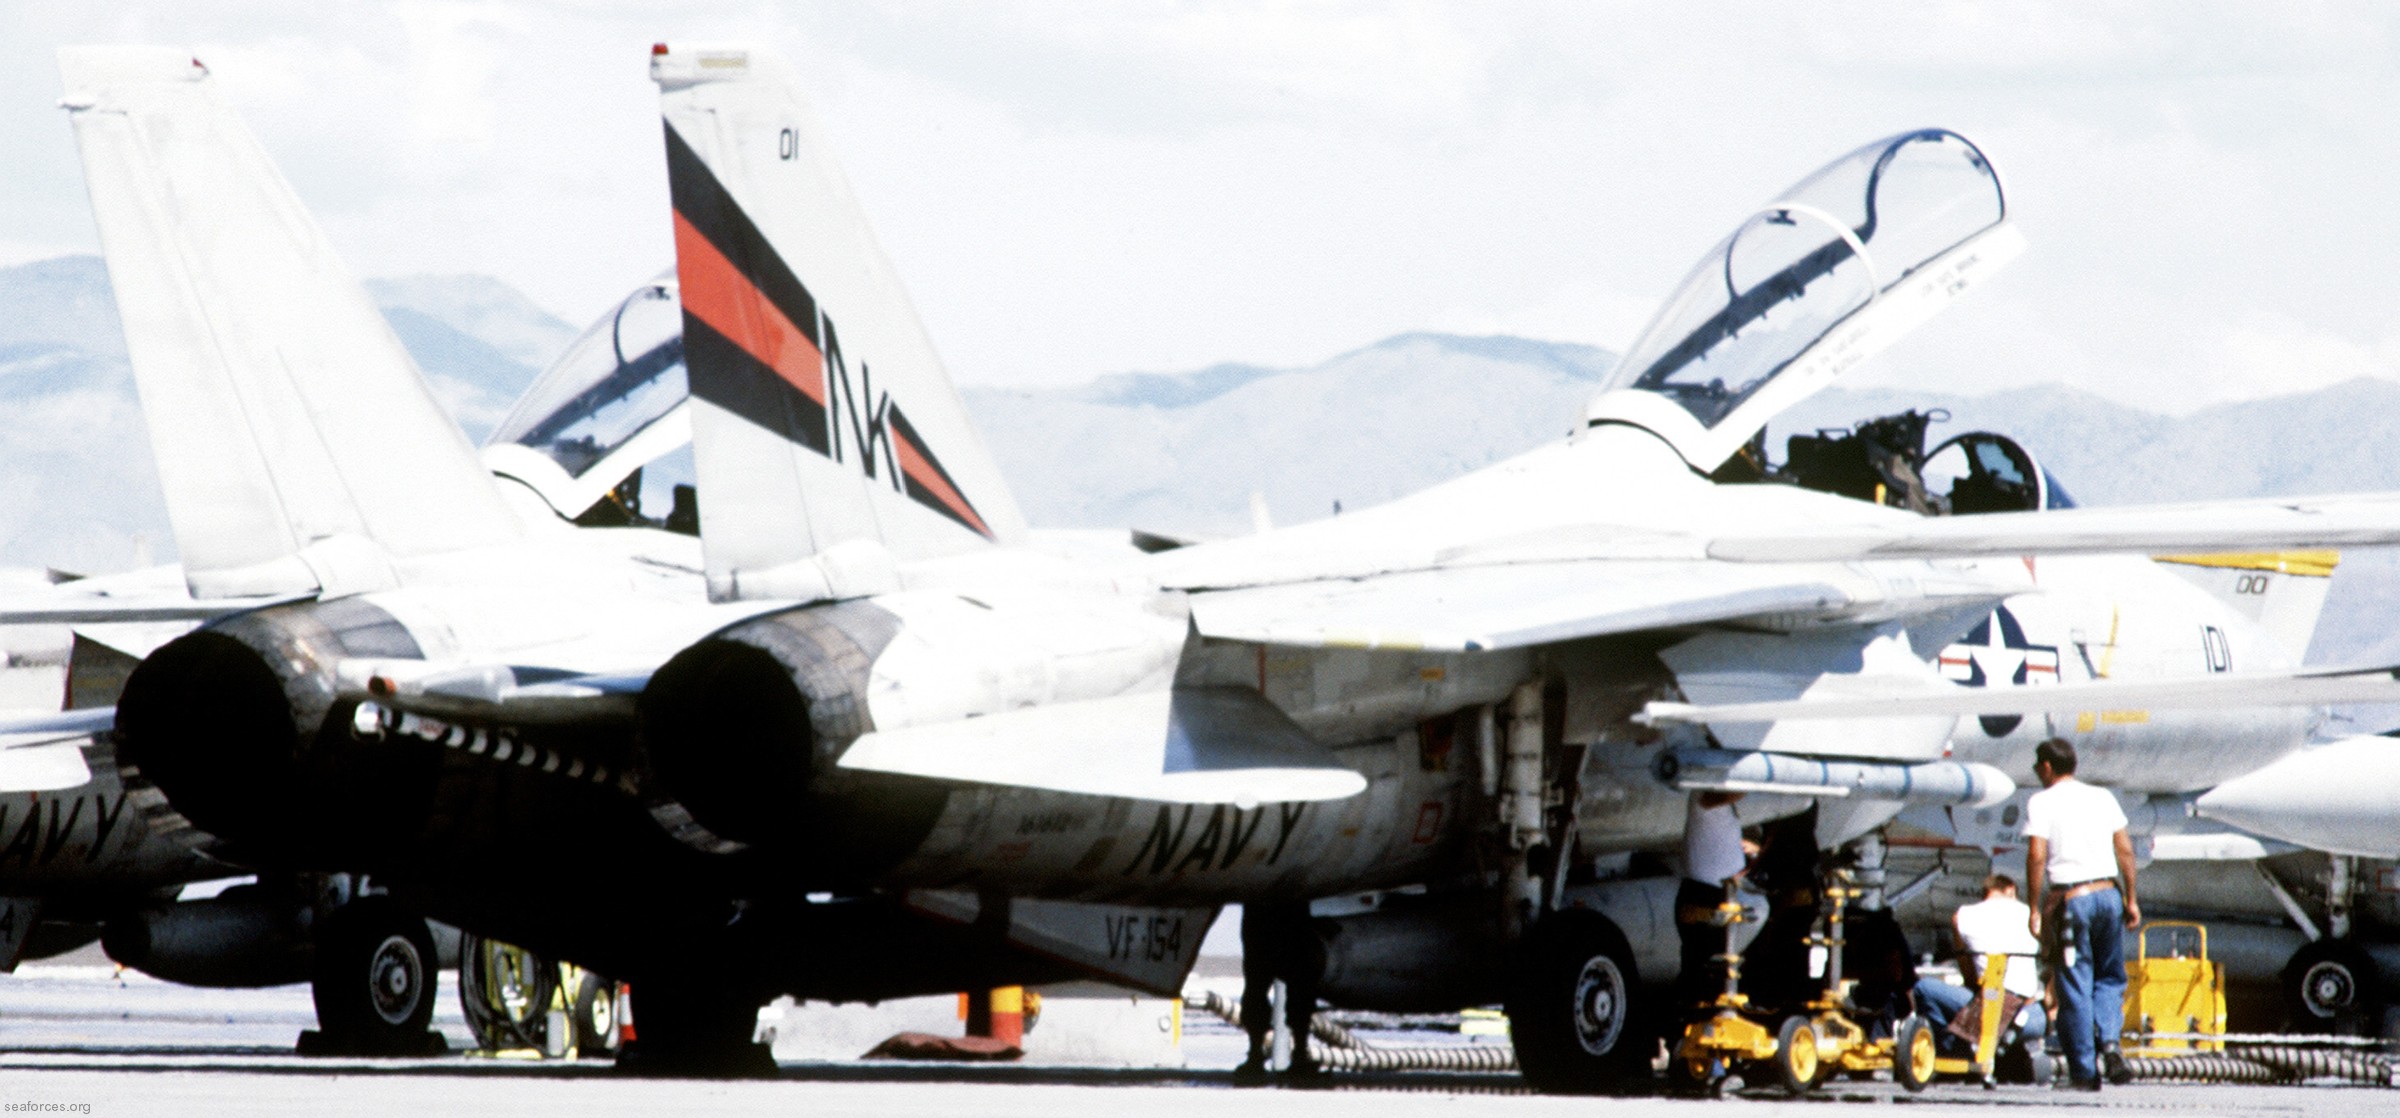 vf-154 black knights fighter squadron us navy f-14a tomcat carrier air wing cvw-14 53 exercise gallant eagle 1988